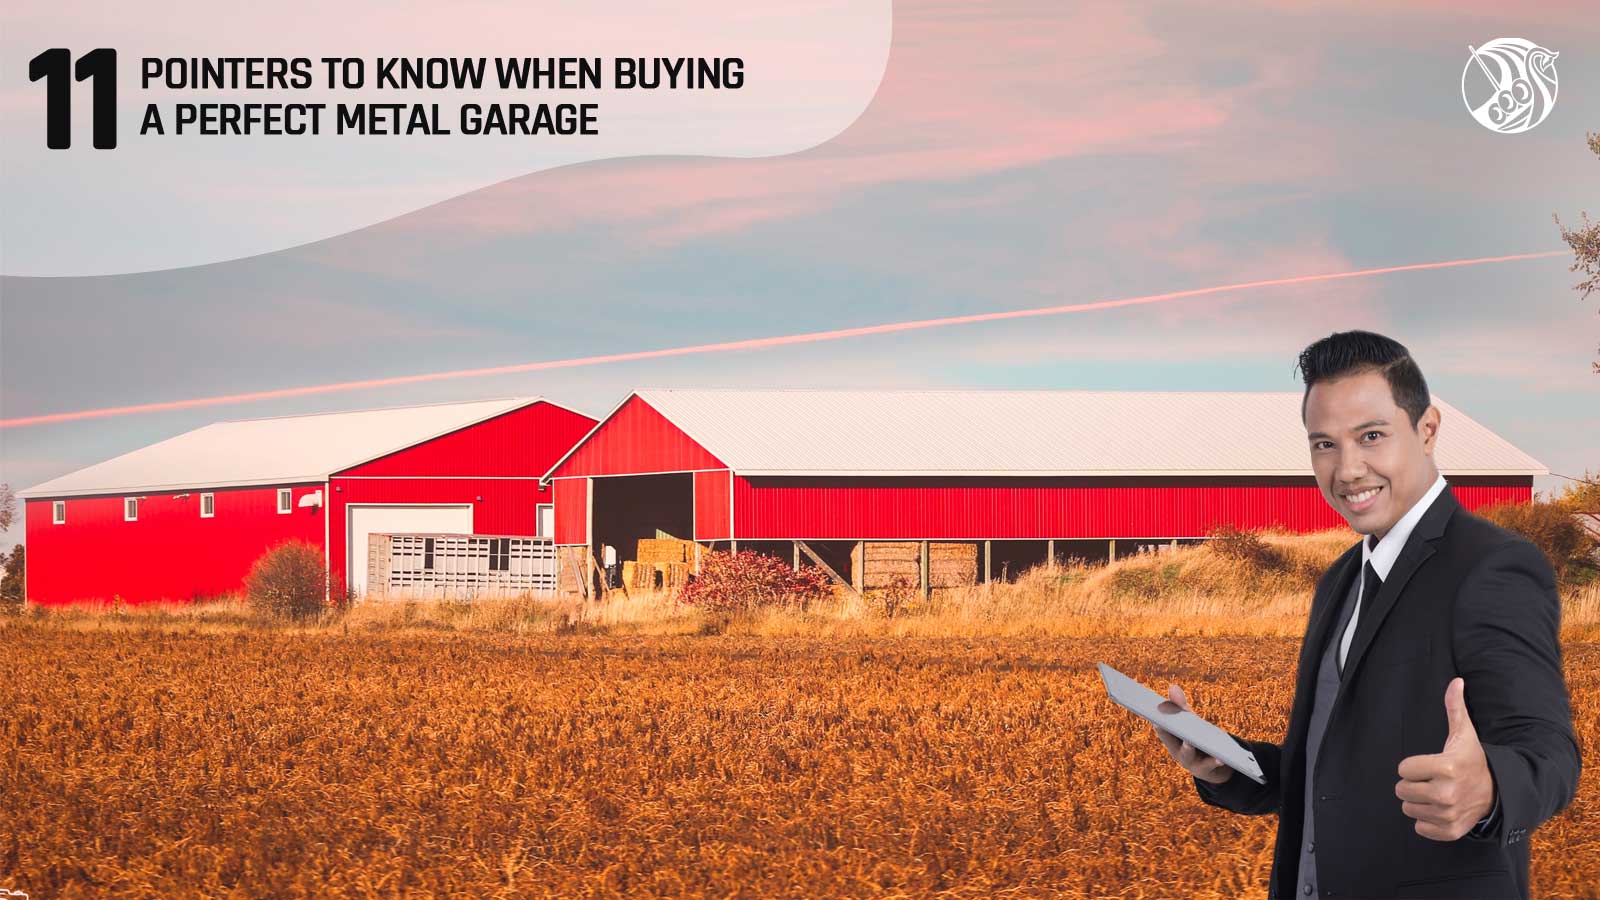 11 Pointers to Know When Buying a Perfect Metal Garage